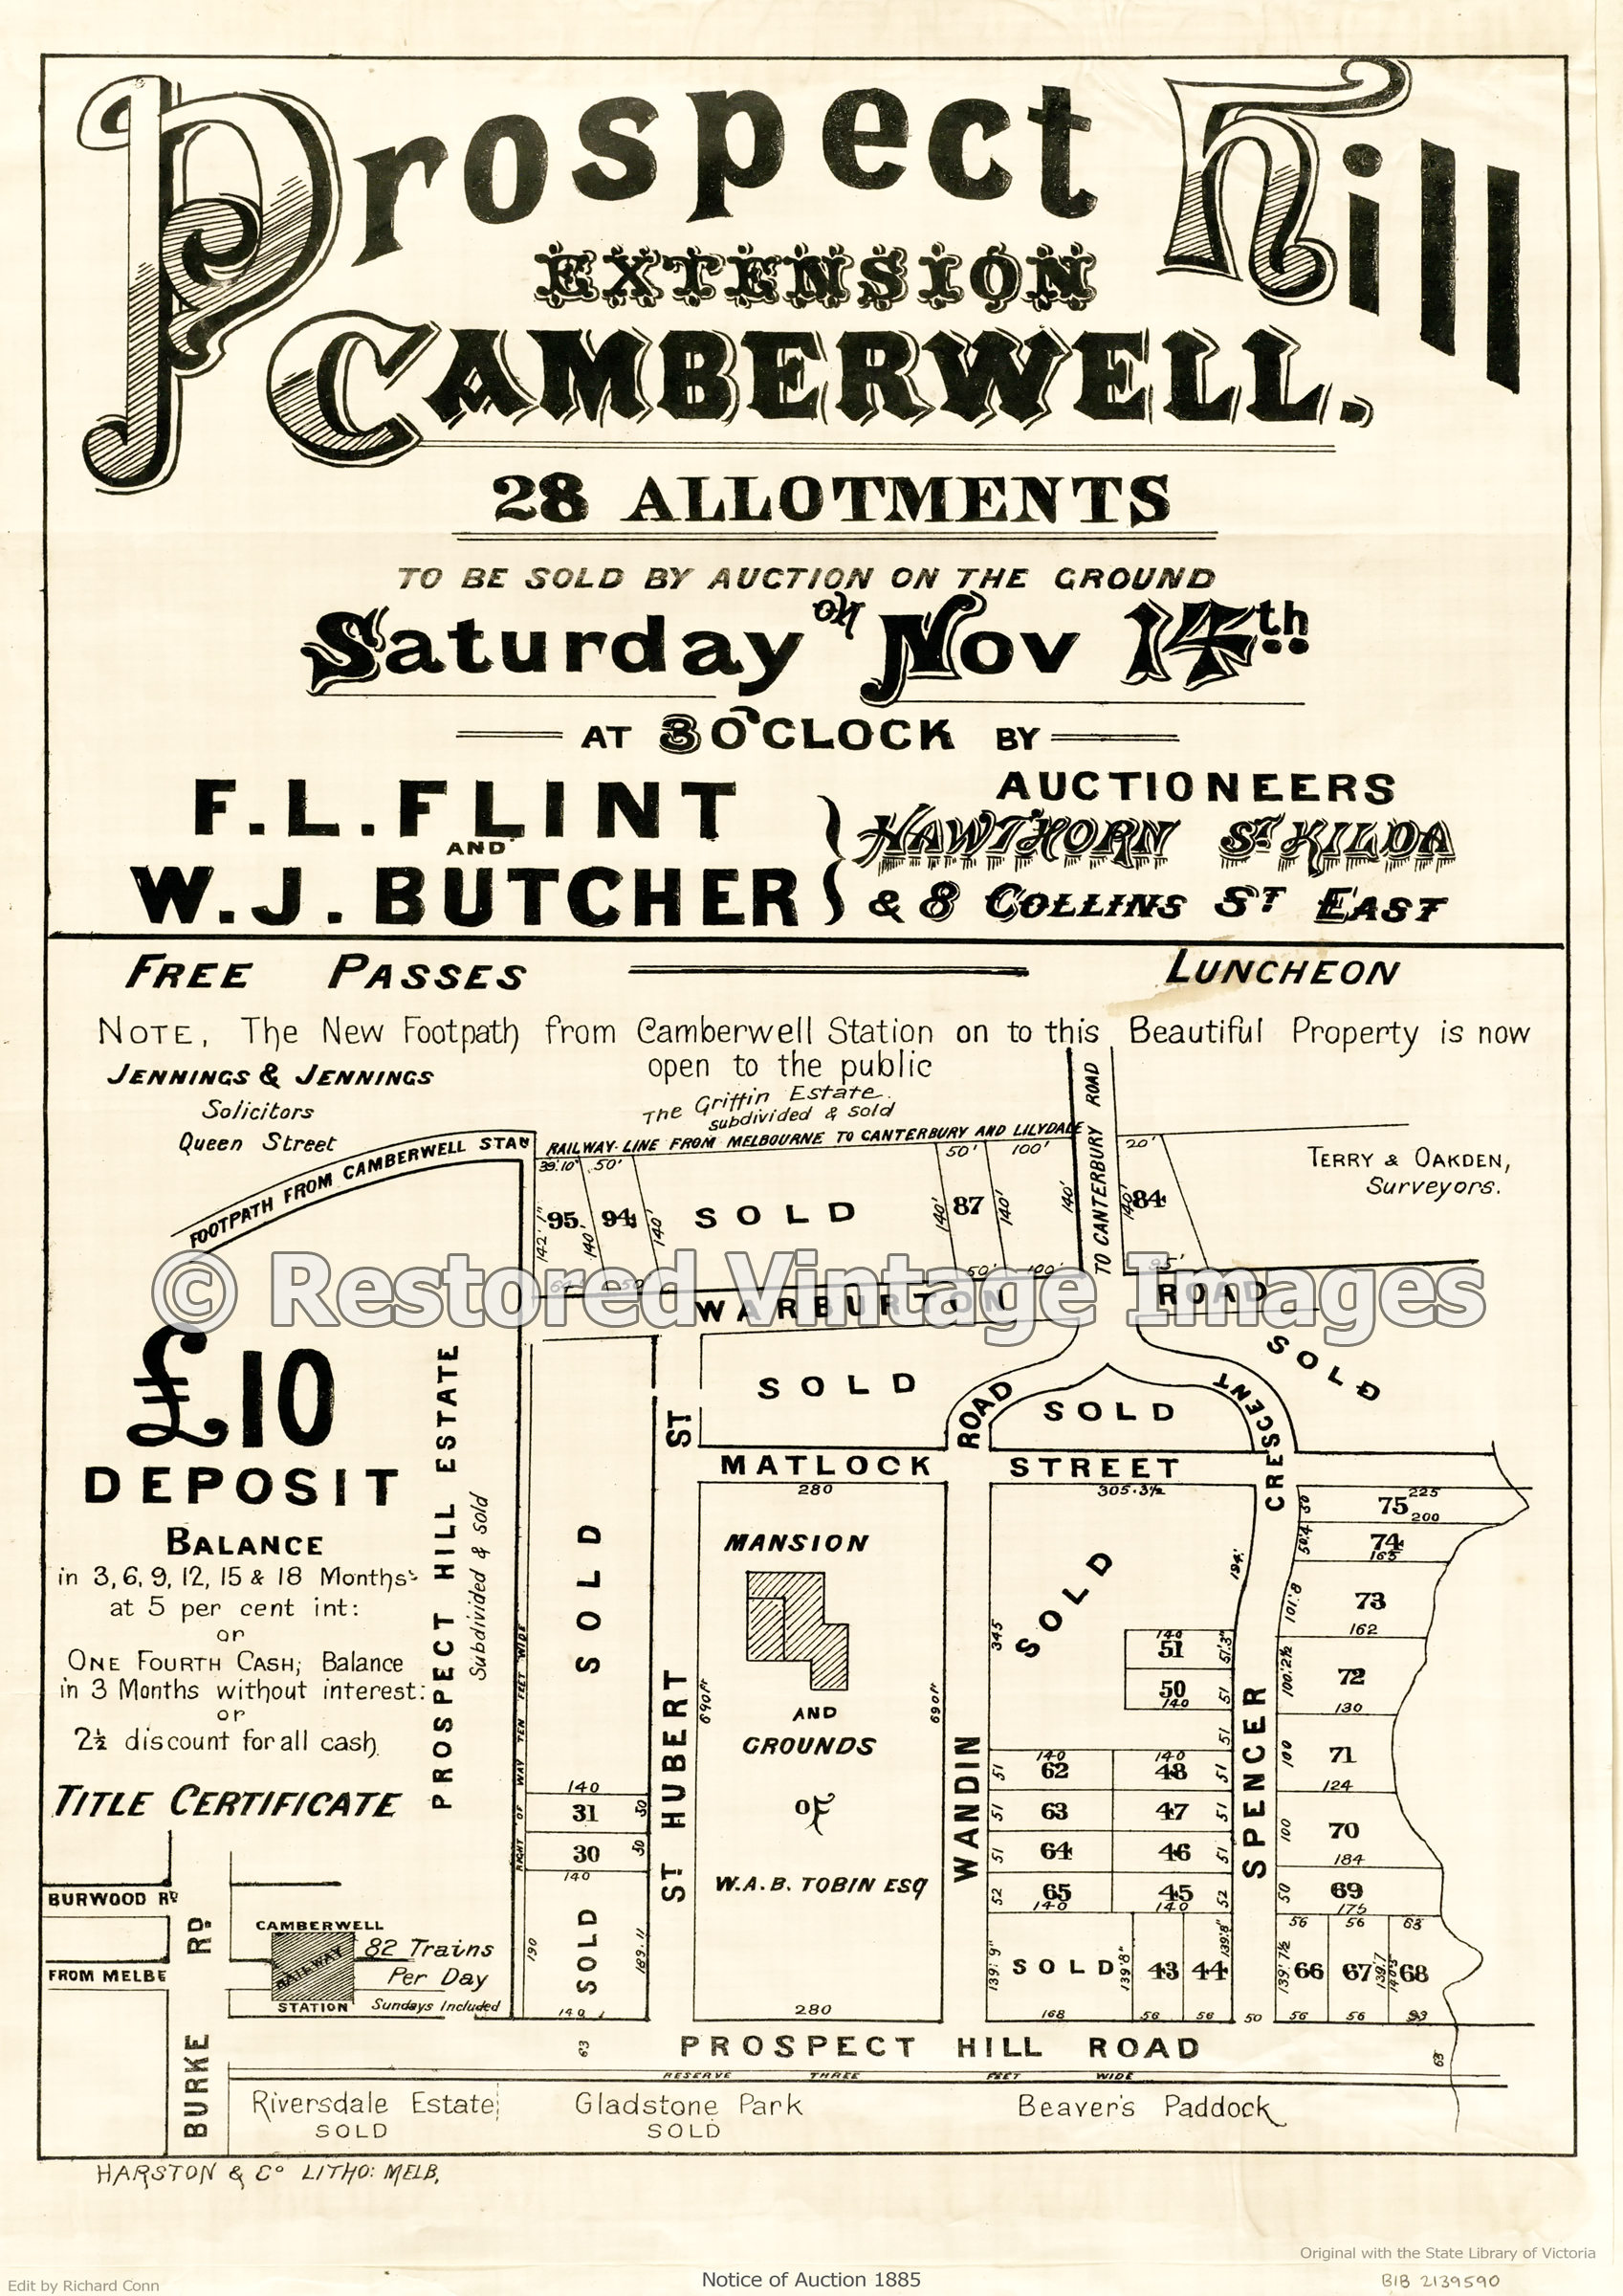 Prospect-Hill Extension Third Sale 1885 – Camberwell